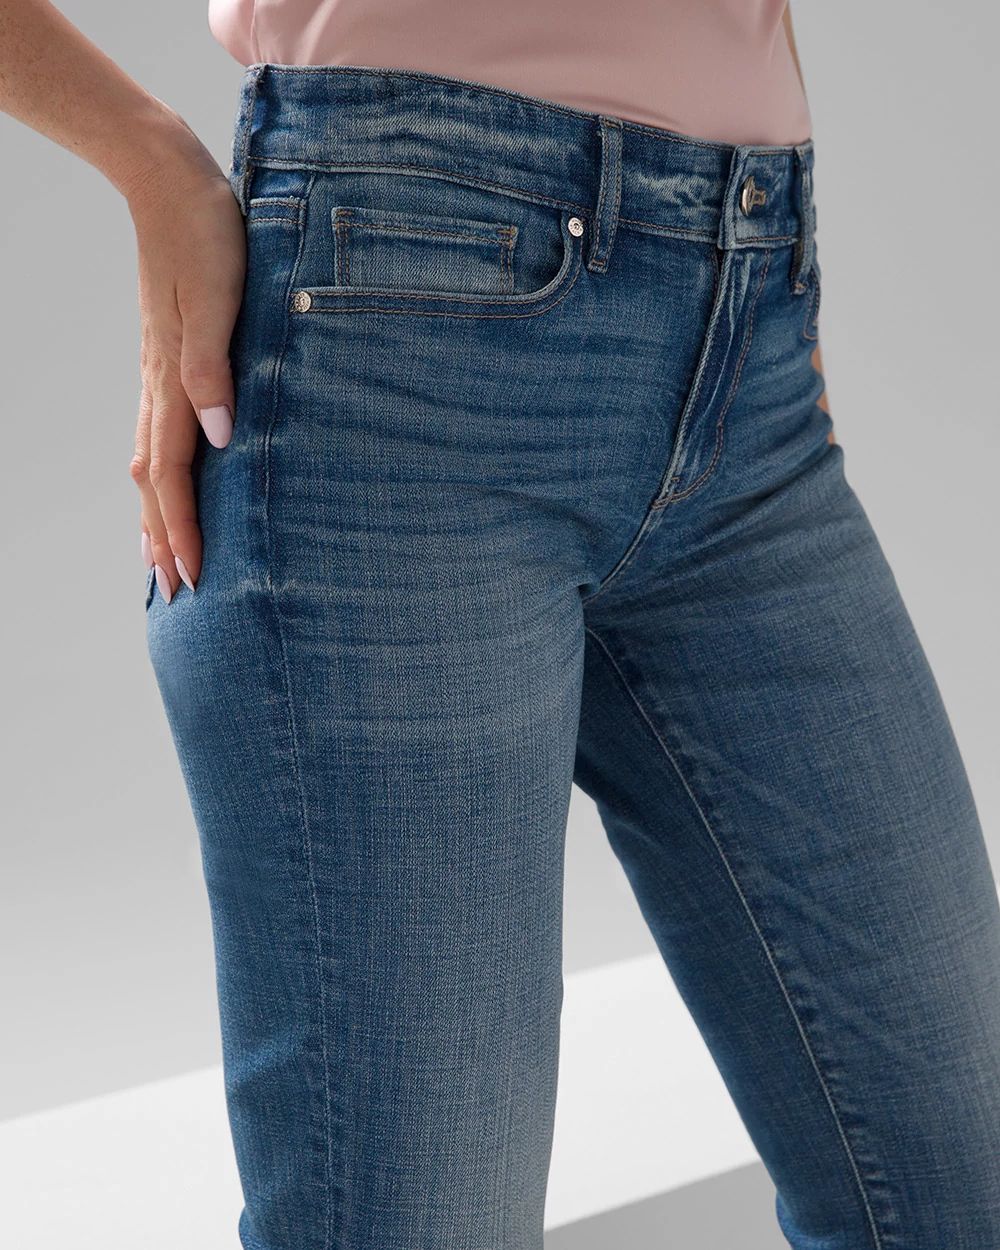 Petite Mid-Rise Everyday Soft Denim  Girlfriend Jeans click to view larger image.